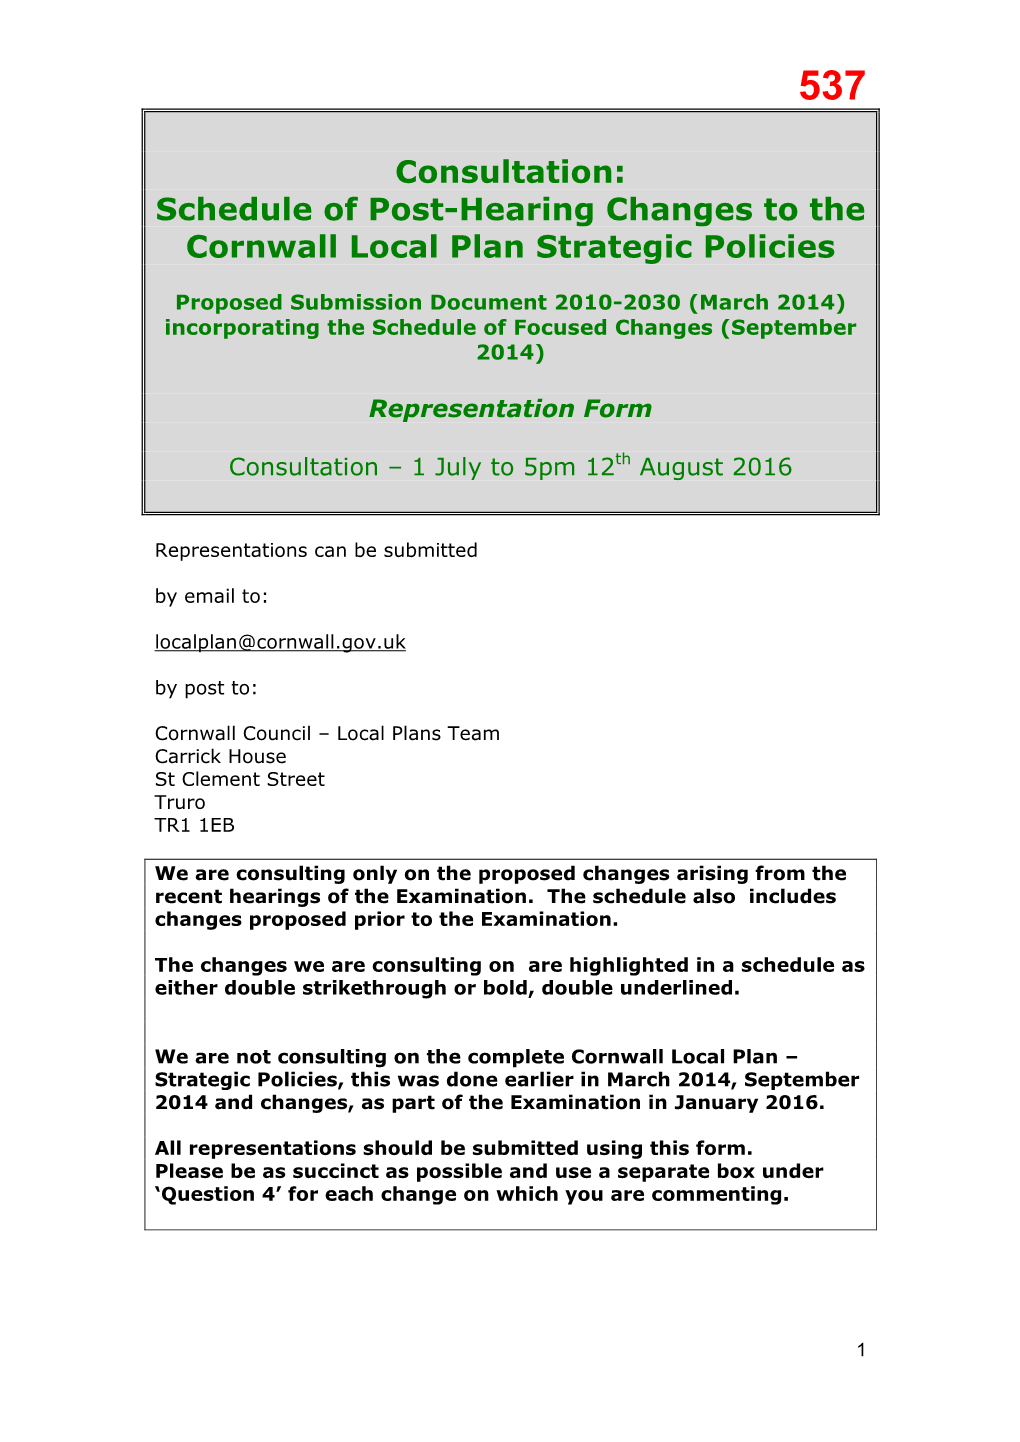 Schedule of Post-Hearing Changes to the Cornwall Local Plan Strategic Policies